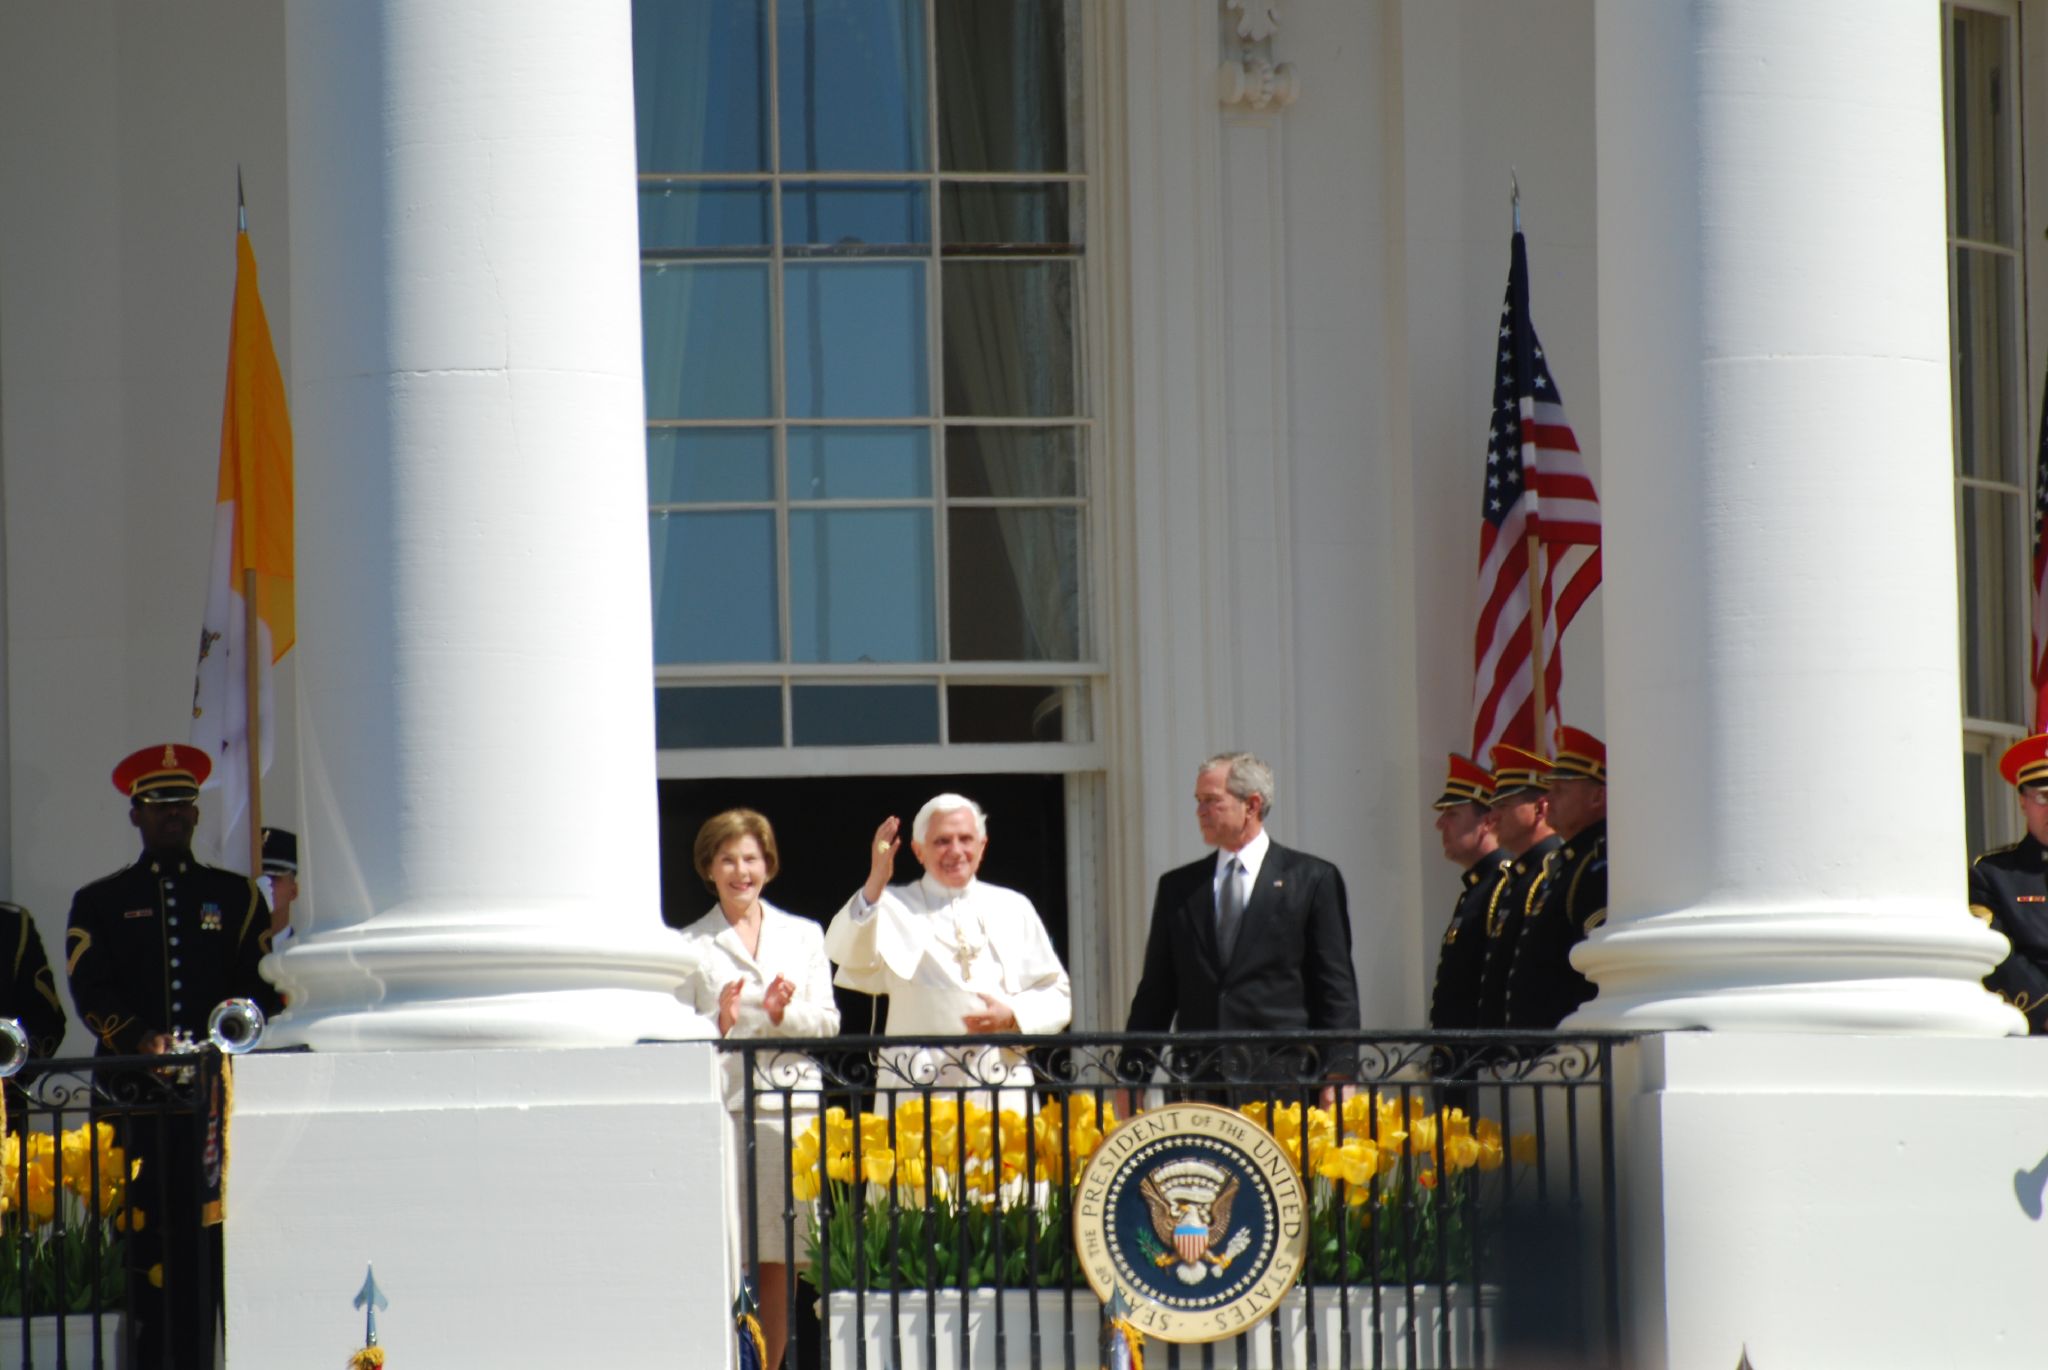 Benedict met with the President at the White House, addressed the presidents of Roman Catholic Colleges and Universities, and held mass at the Nationals Park in Washington, D.C., and Yankee Stadium in New York City. (Photo: John Sonderman/CC BY-NC 2.0)